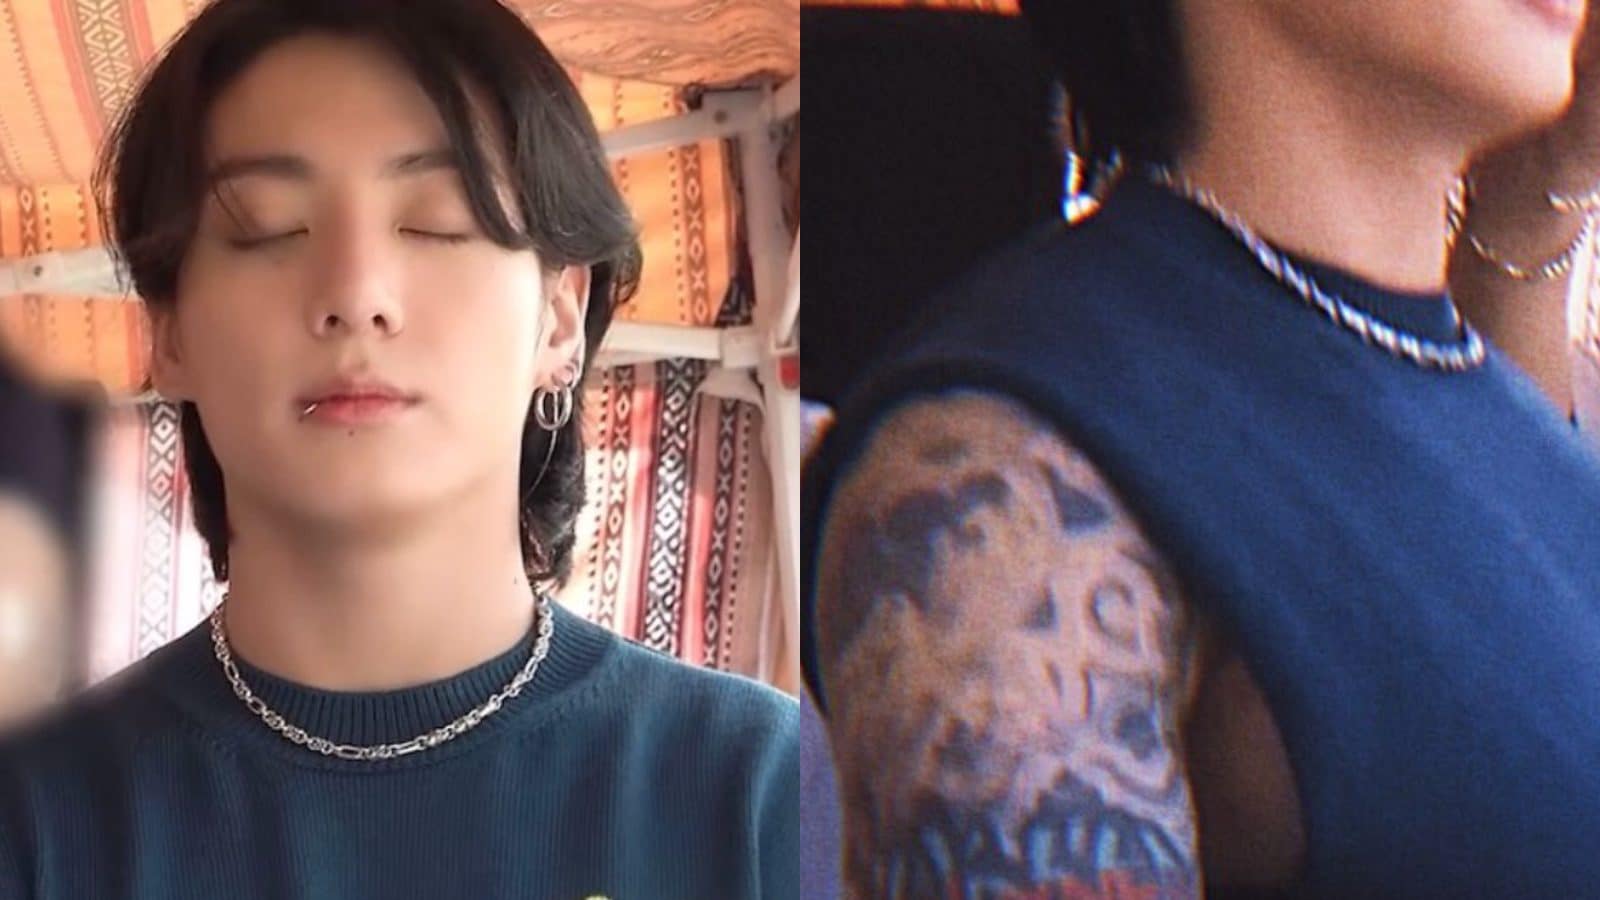 BTS Jungkook breaks silence on his Tattoo criticism 'denying my past self'